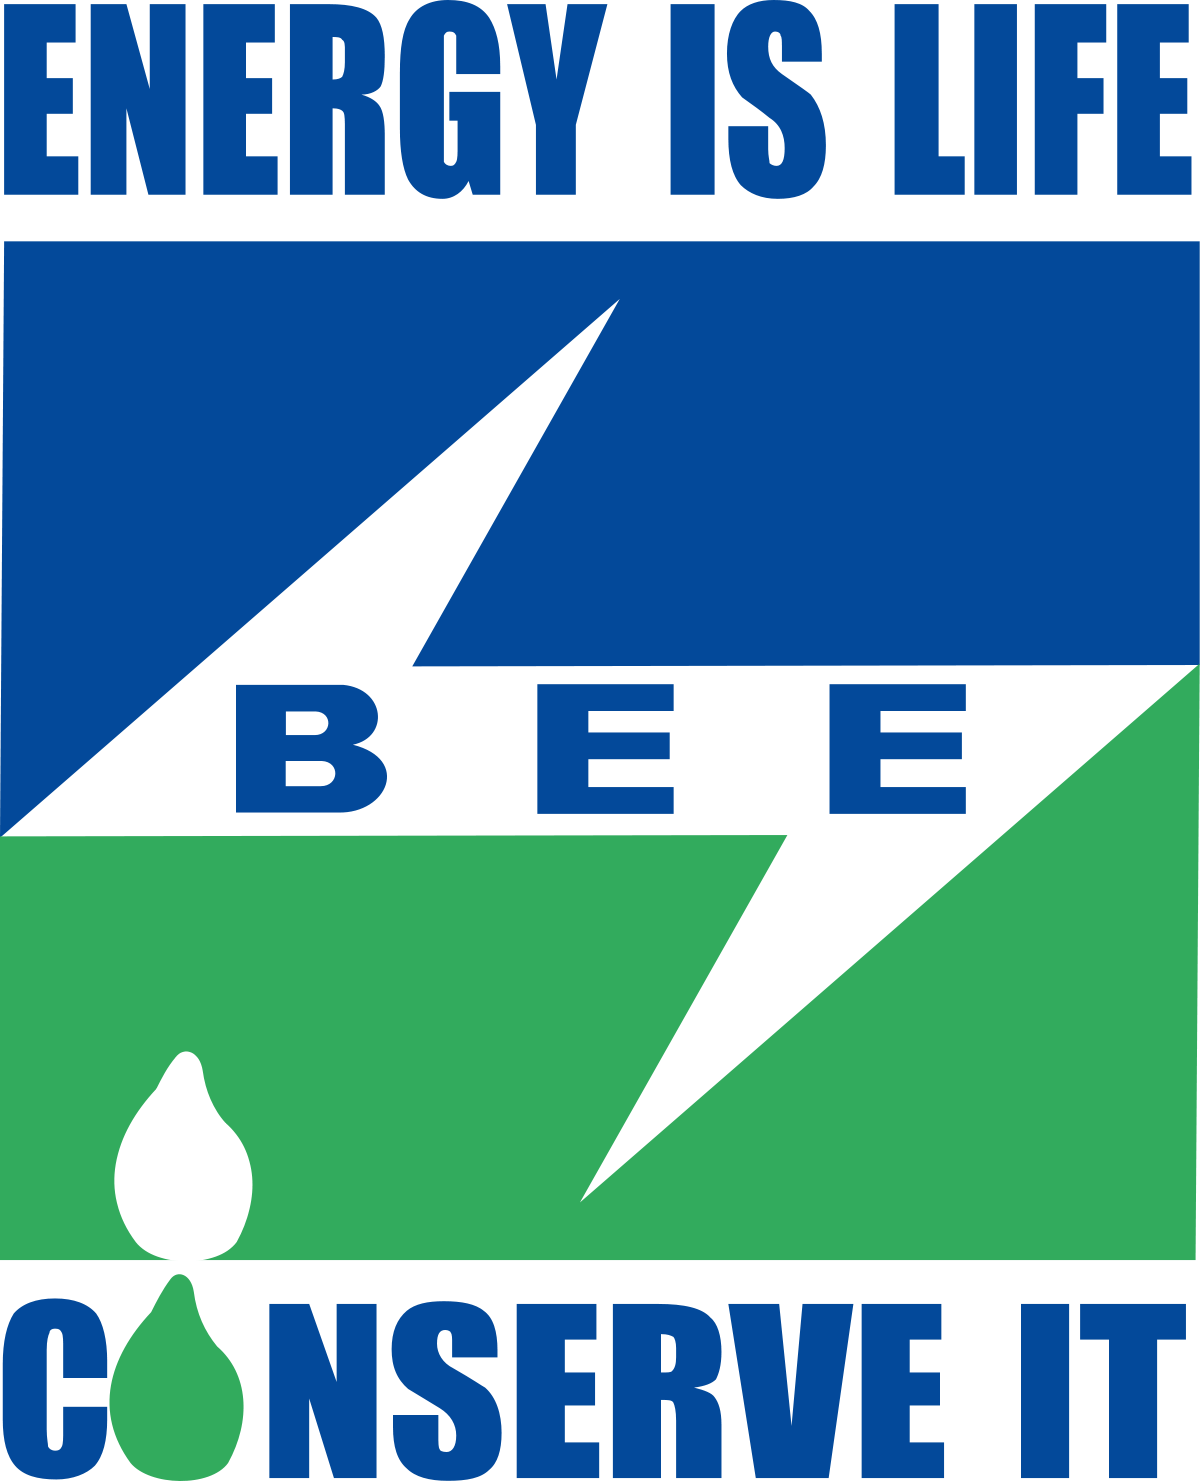 Over 550 applicants for BEE energy conservation awards